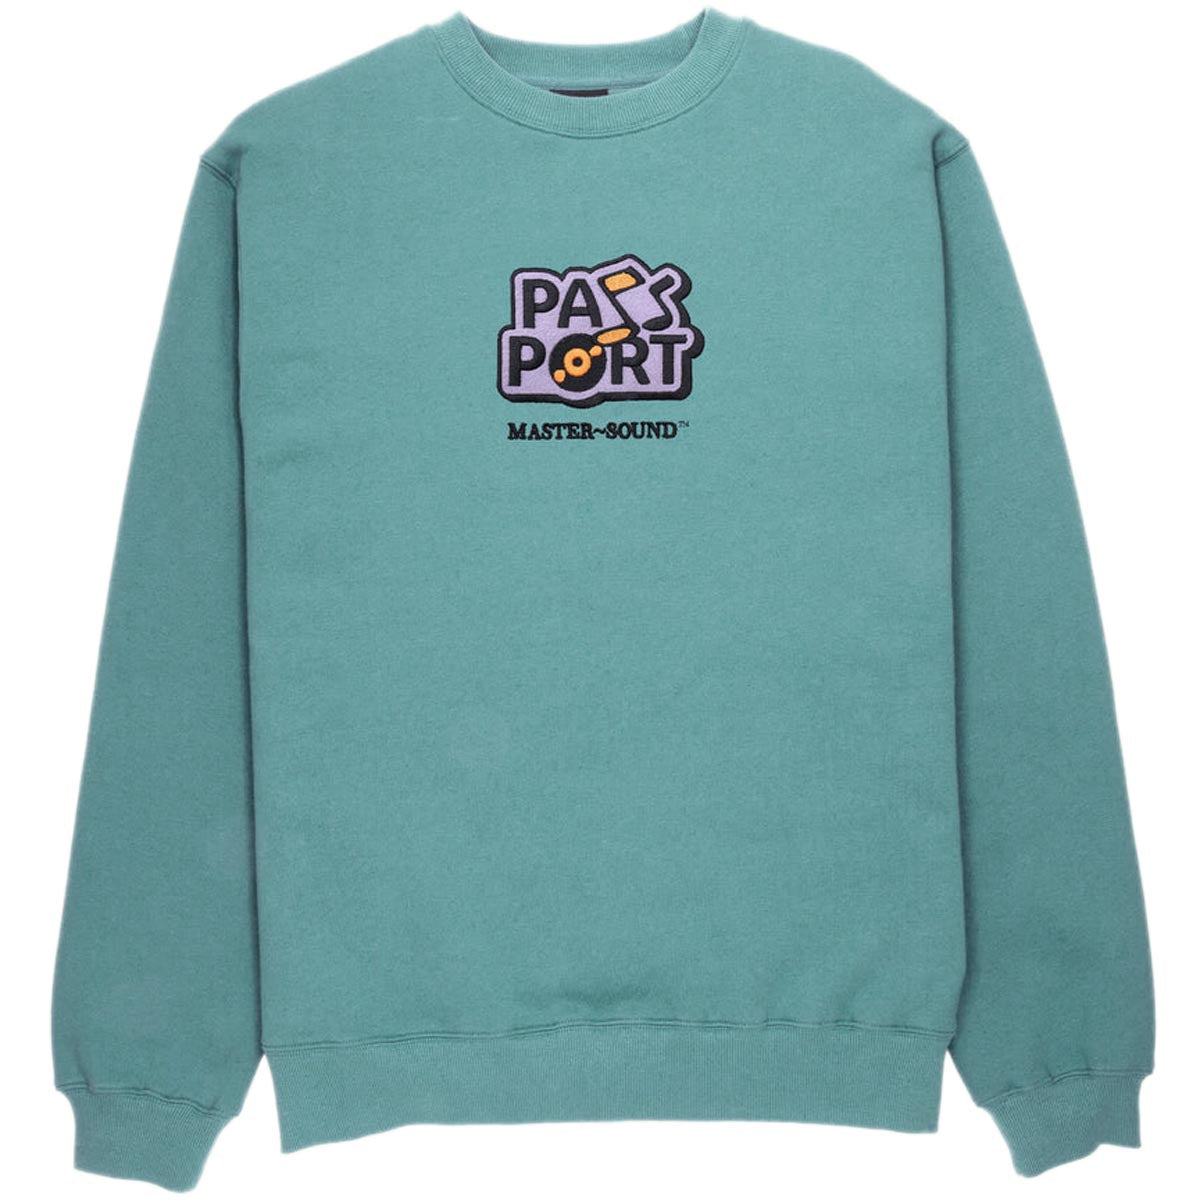 Passport Master Sound Embroidered Sweater - Washed Out Teal image 1